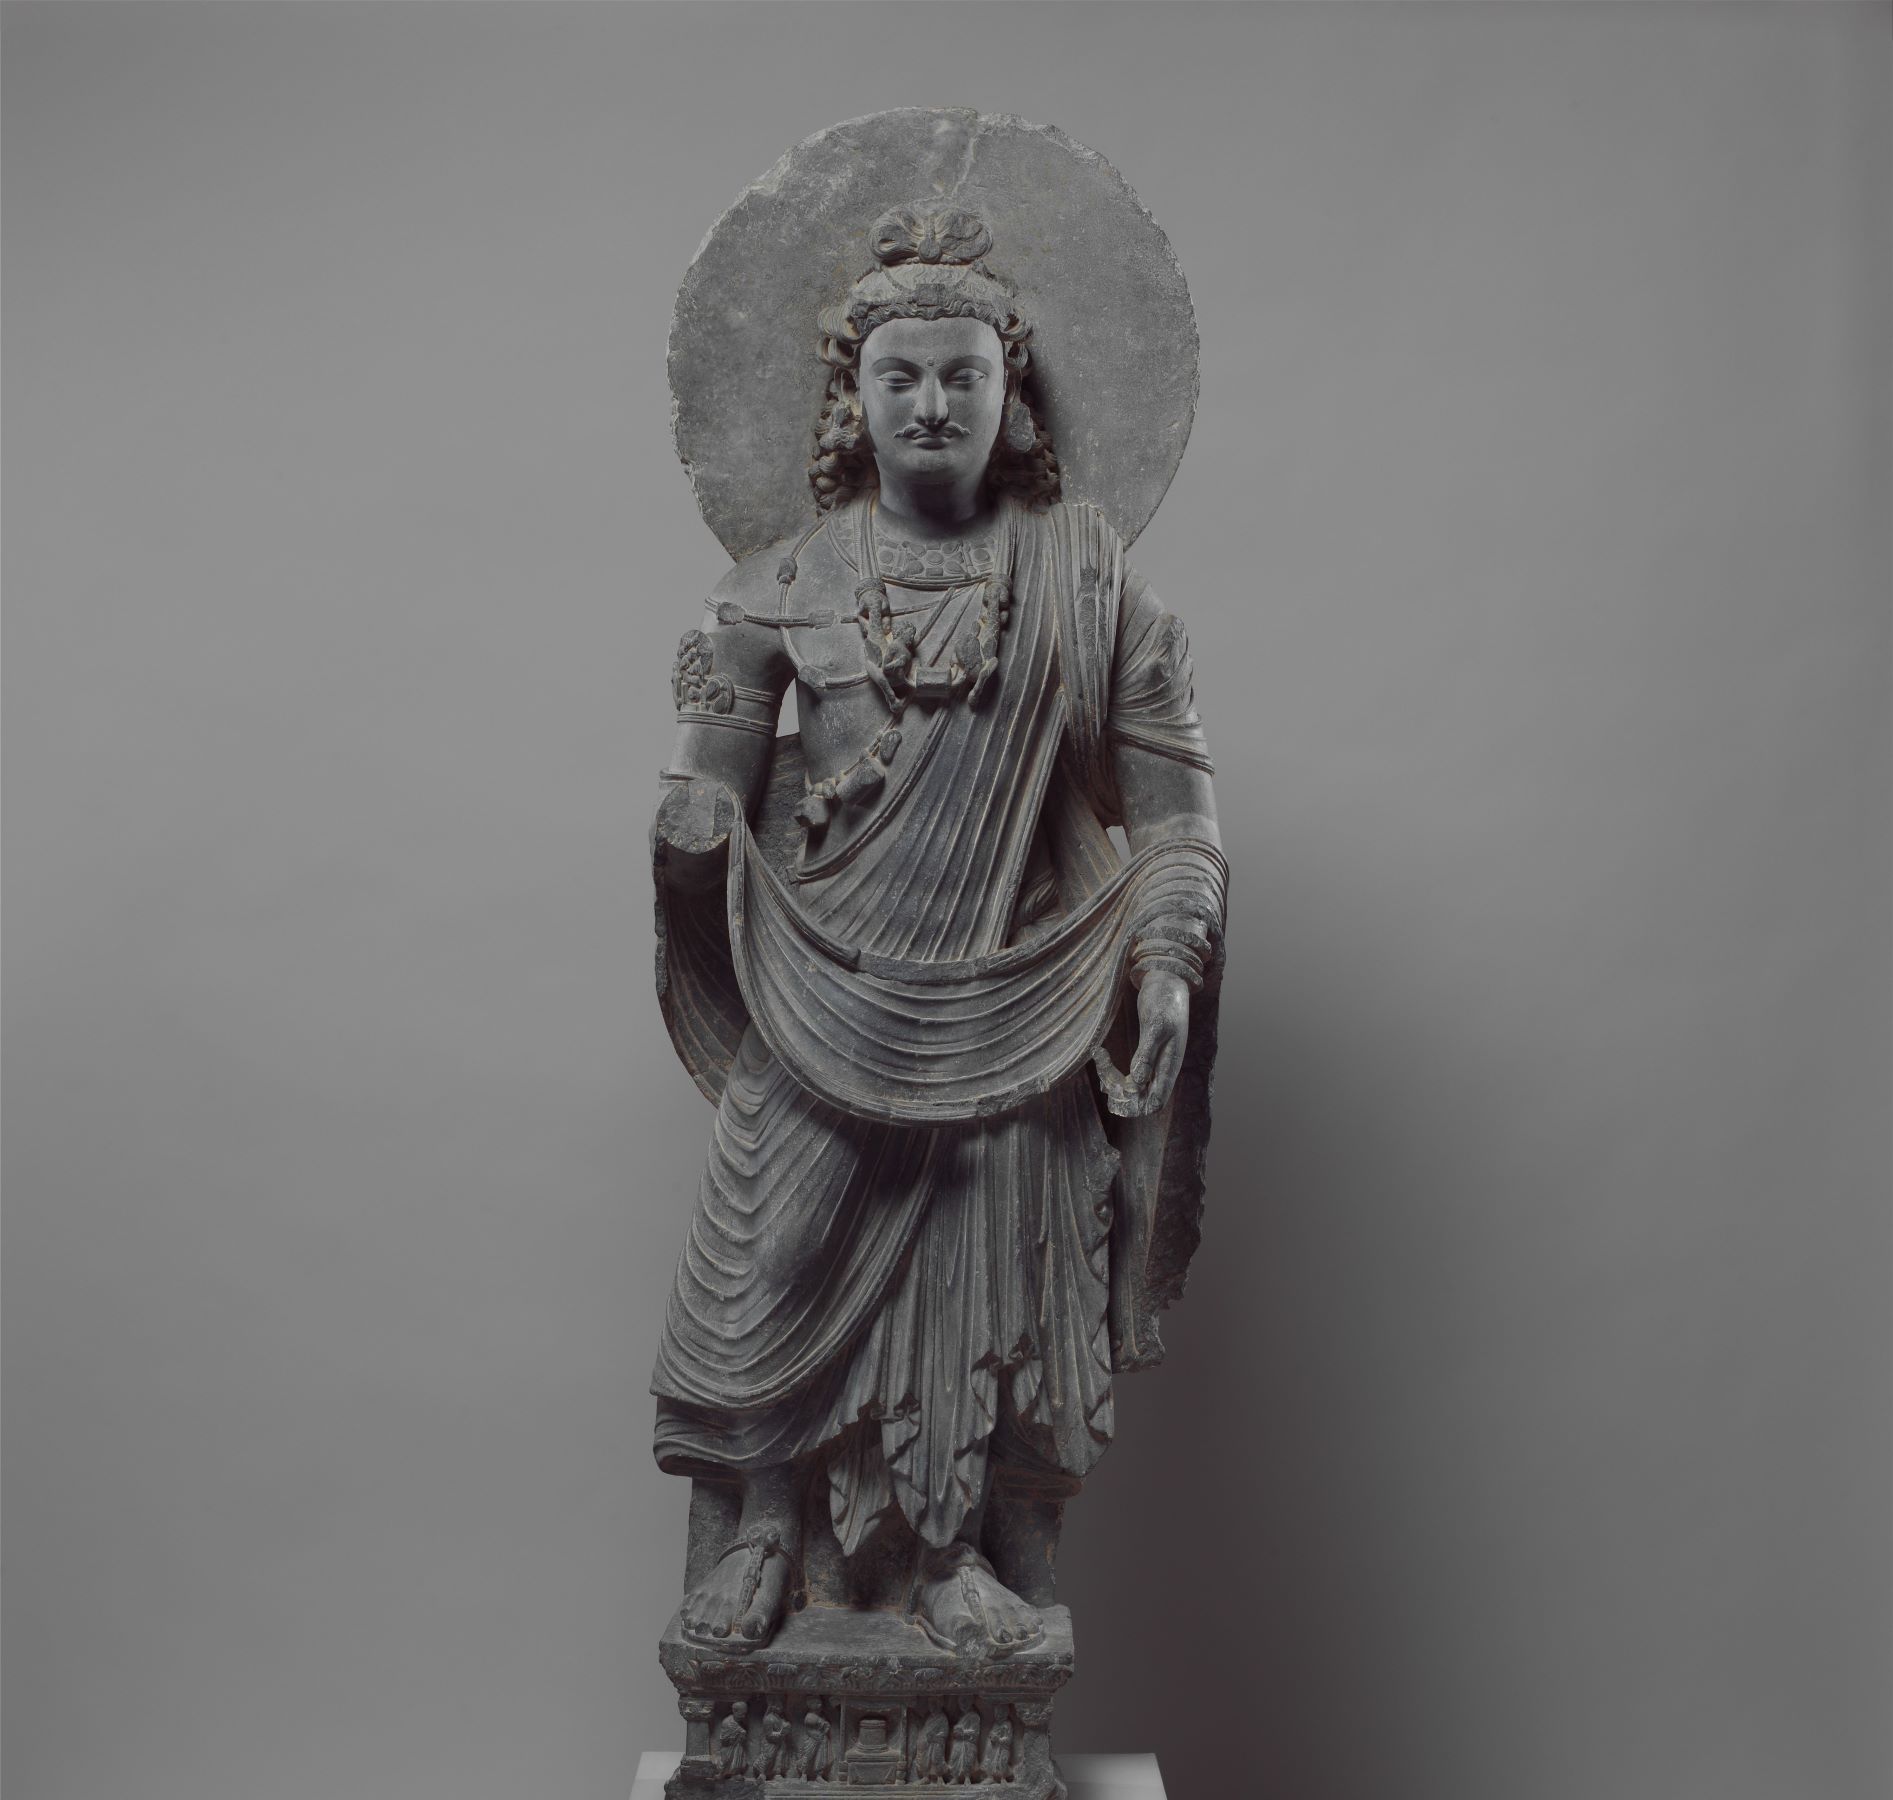 12-intriguing-facts-about-the-gandhara-buddha-statues